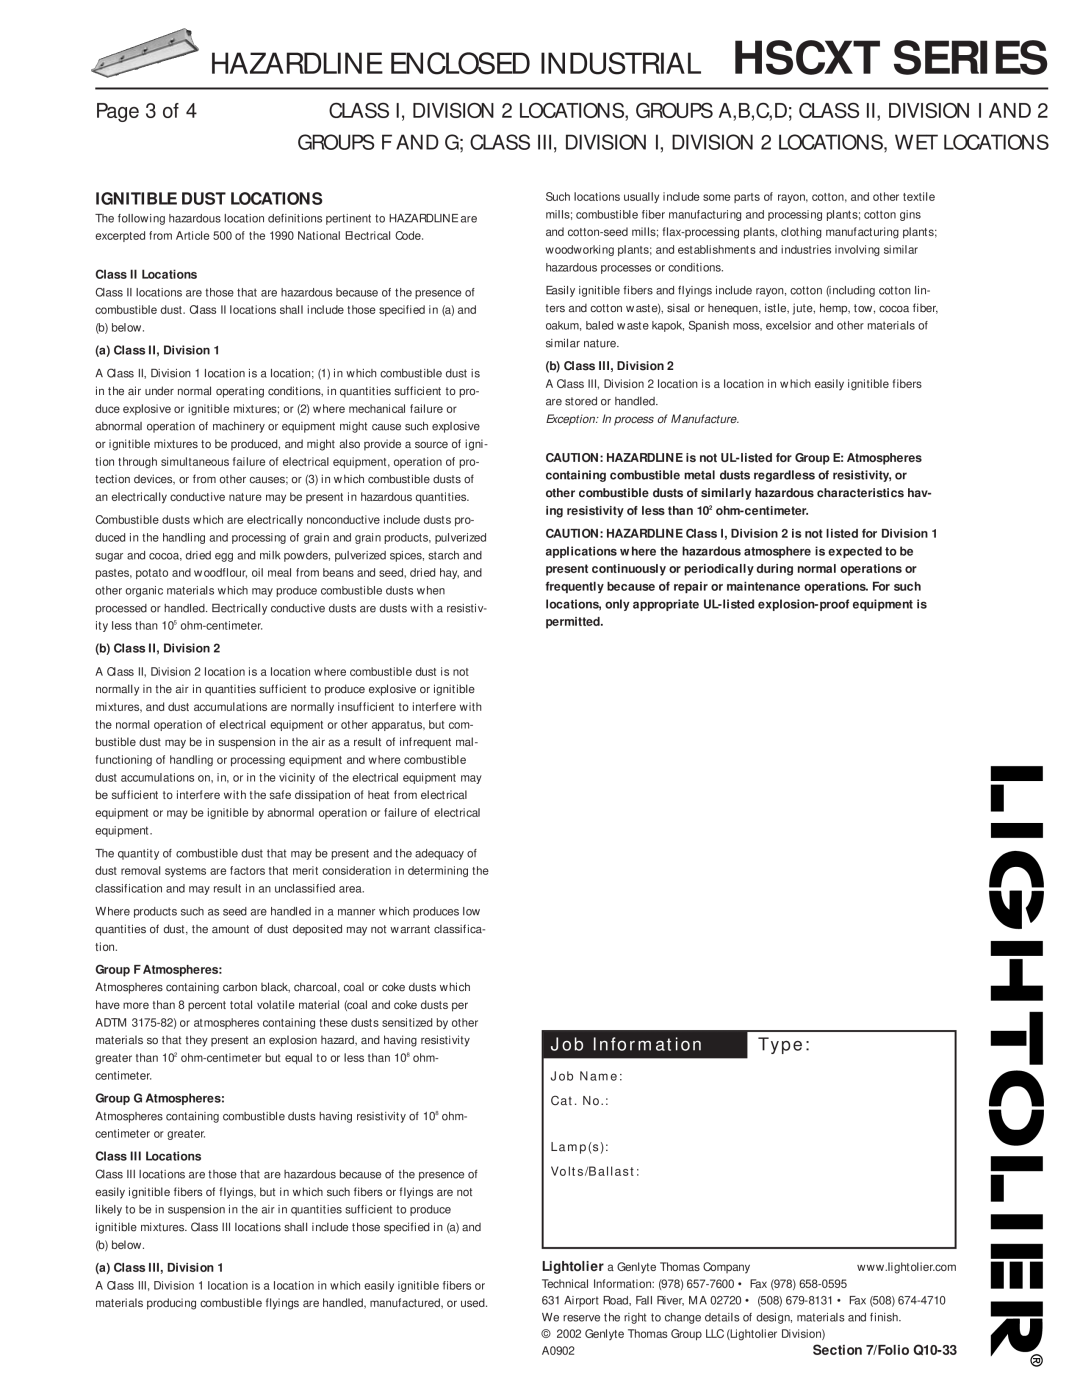 Lightolier HSCXT Series dimensions Page 3 of, Ignitible Dust Locations, Type, Hazardline Enclosed Industrial Hscxt Series 